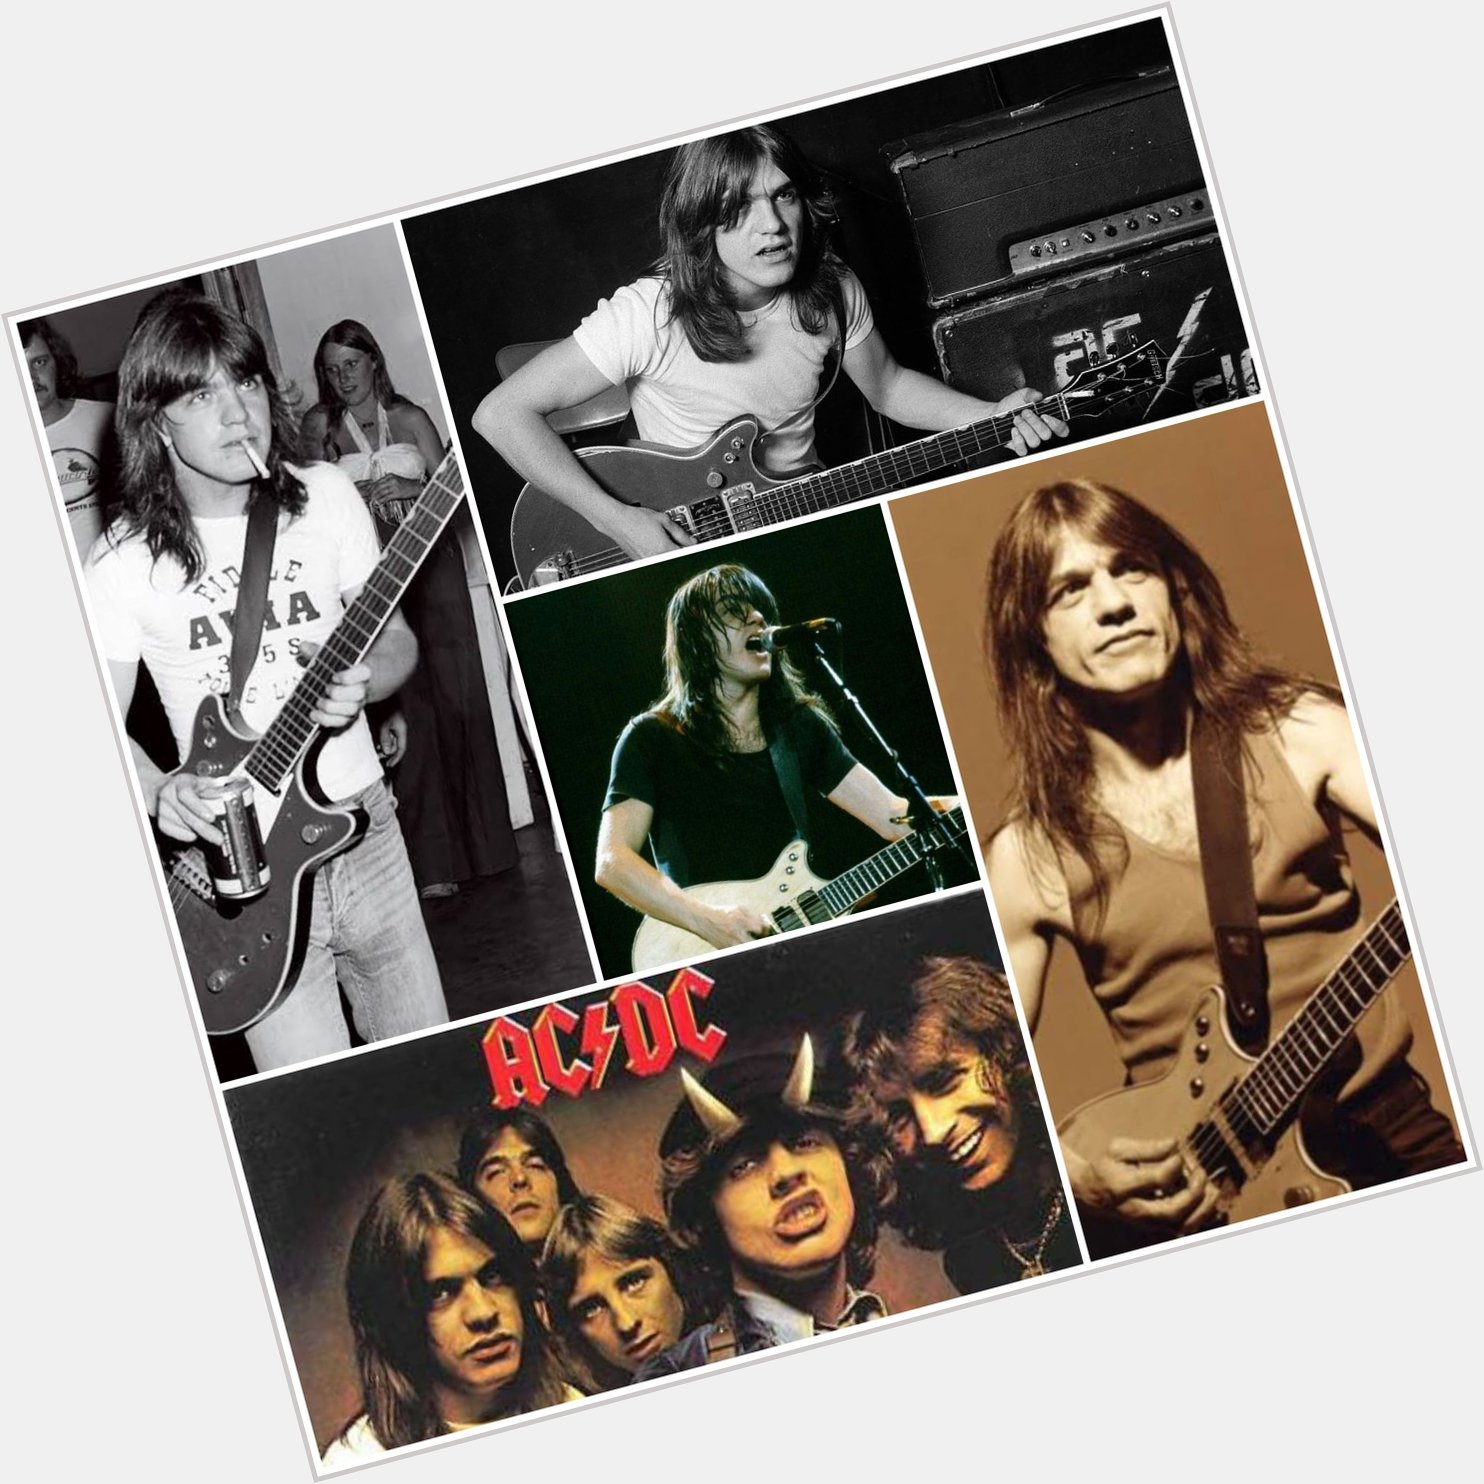 *6.1.1953
Happy birthday Malcolm Young    